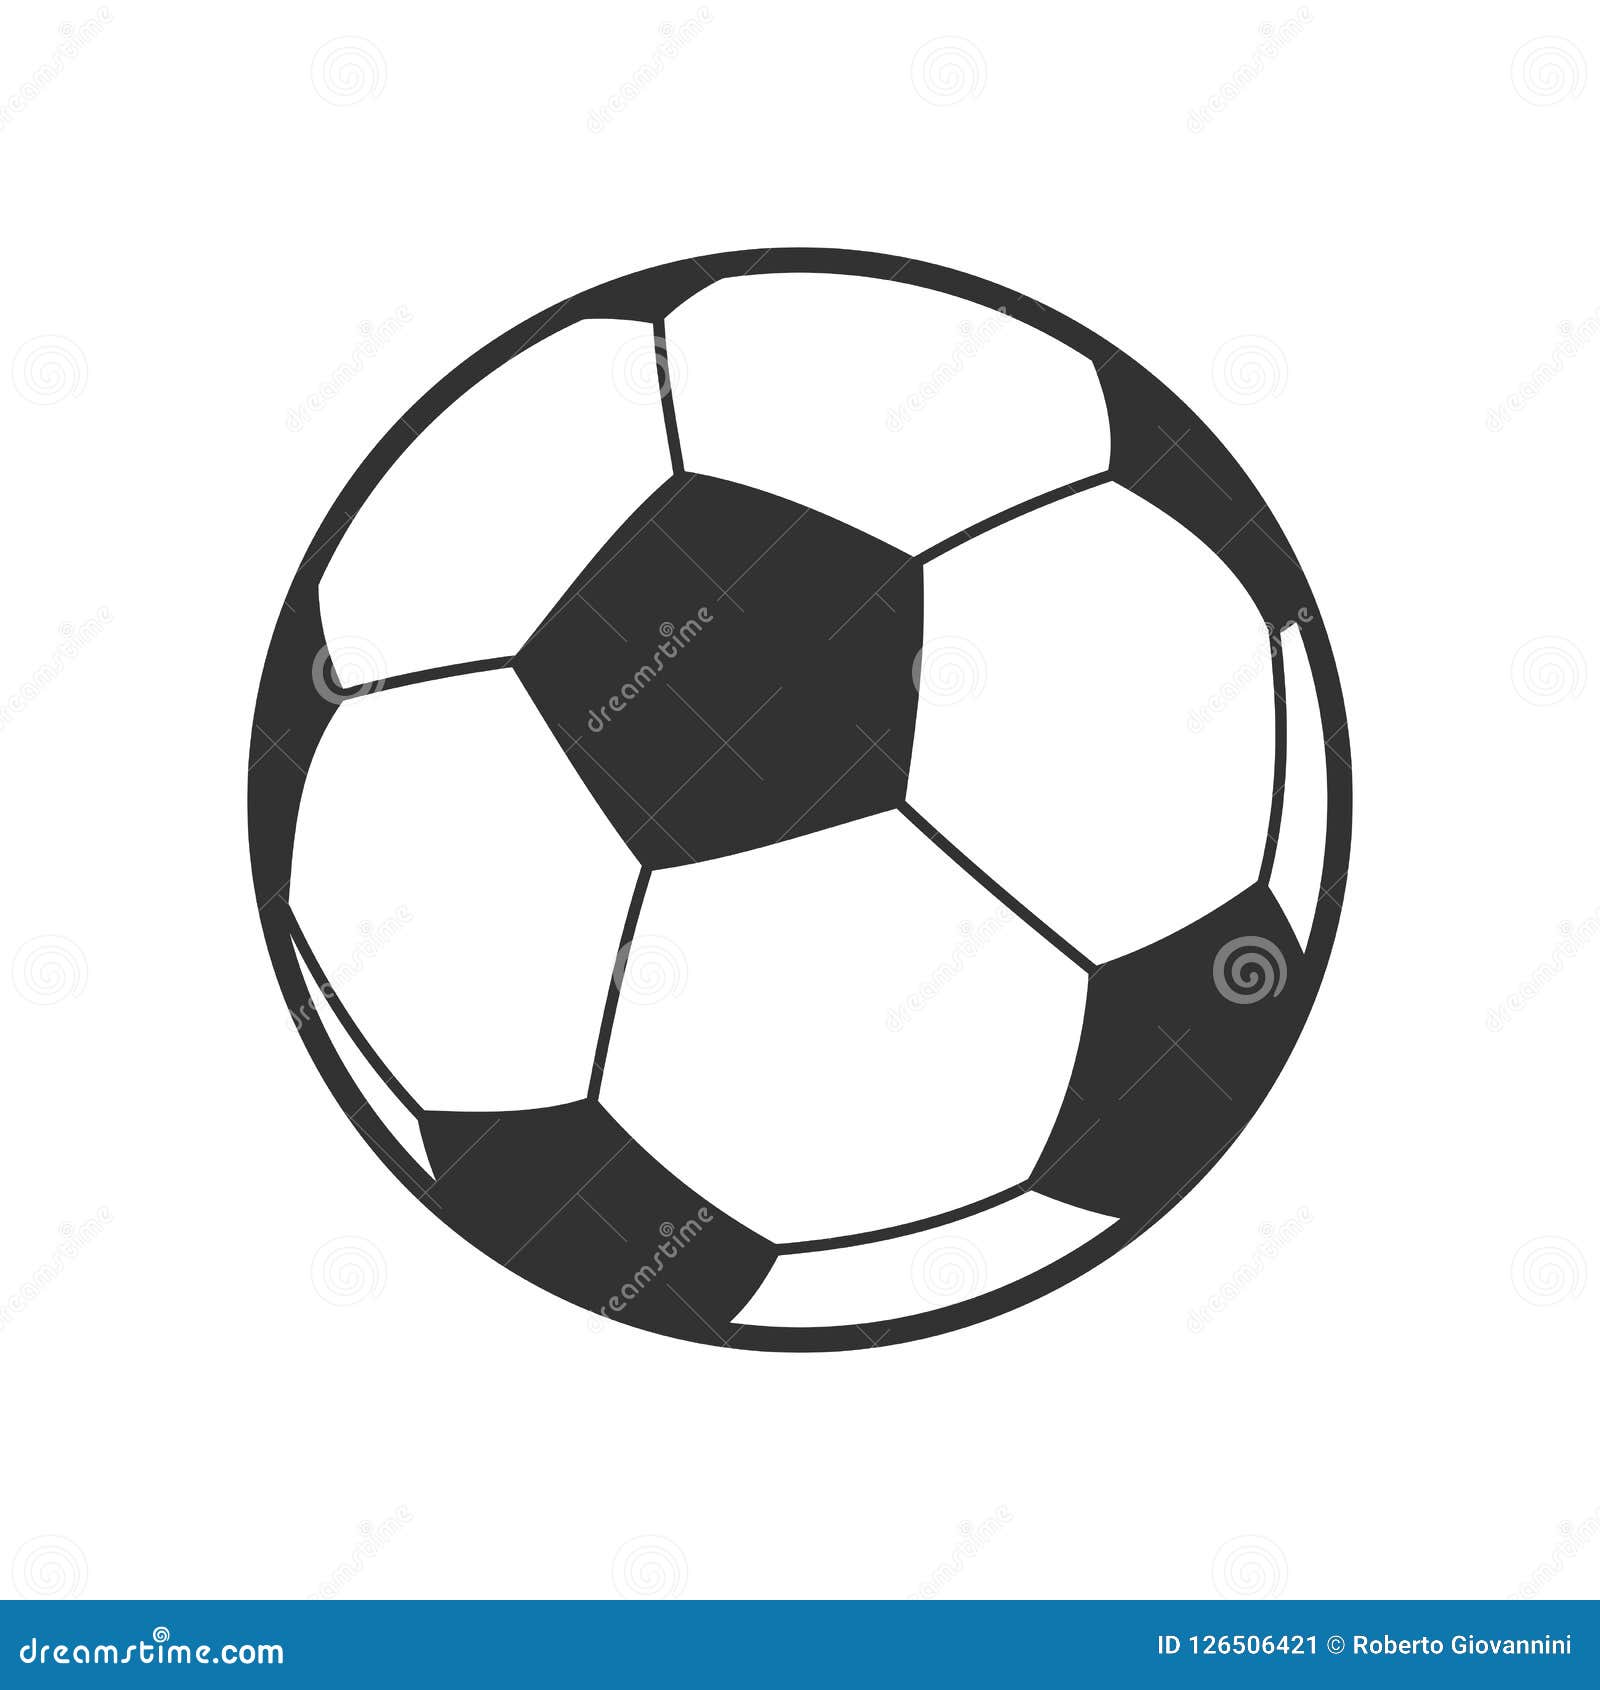 football or soccer ball outline icon on white